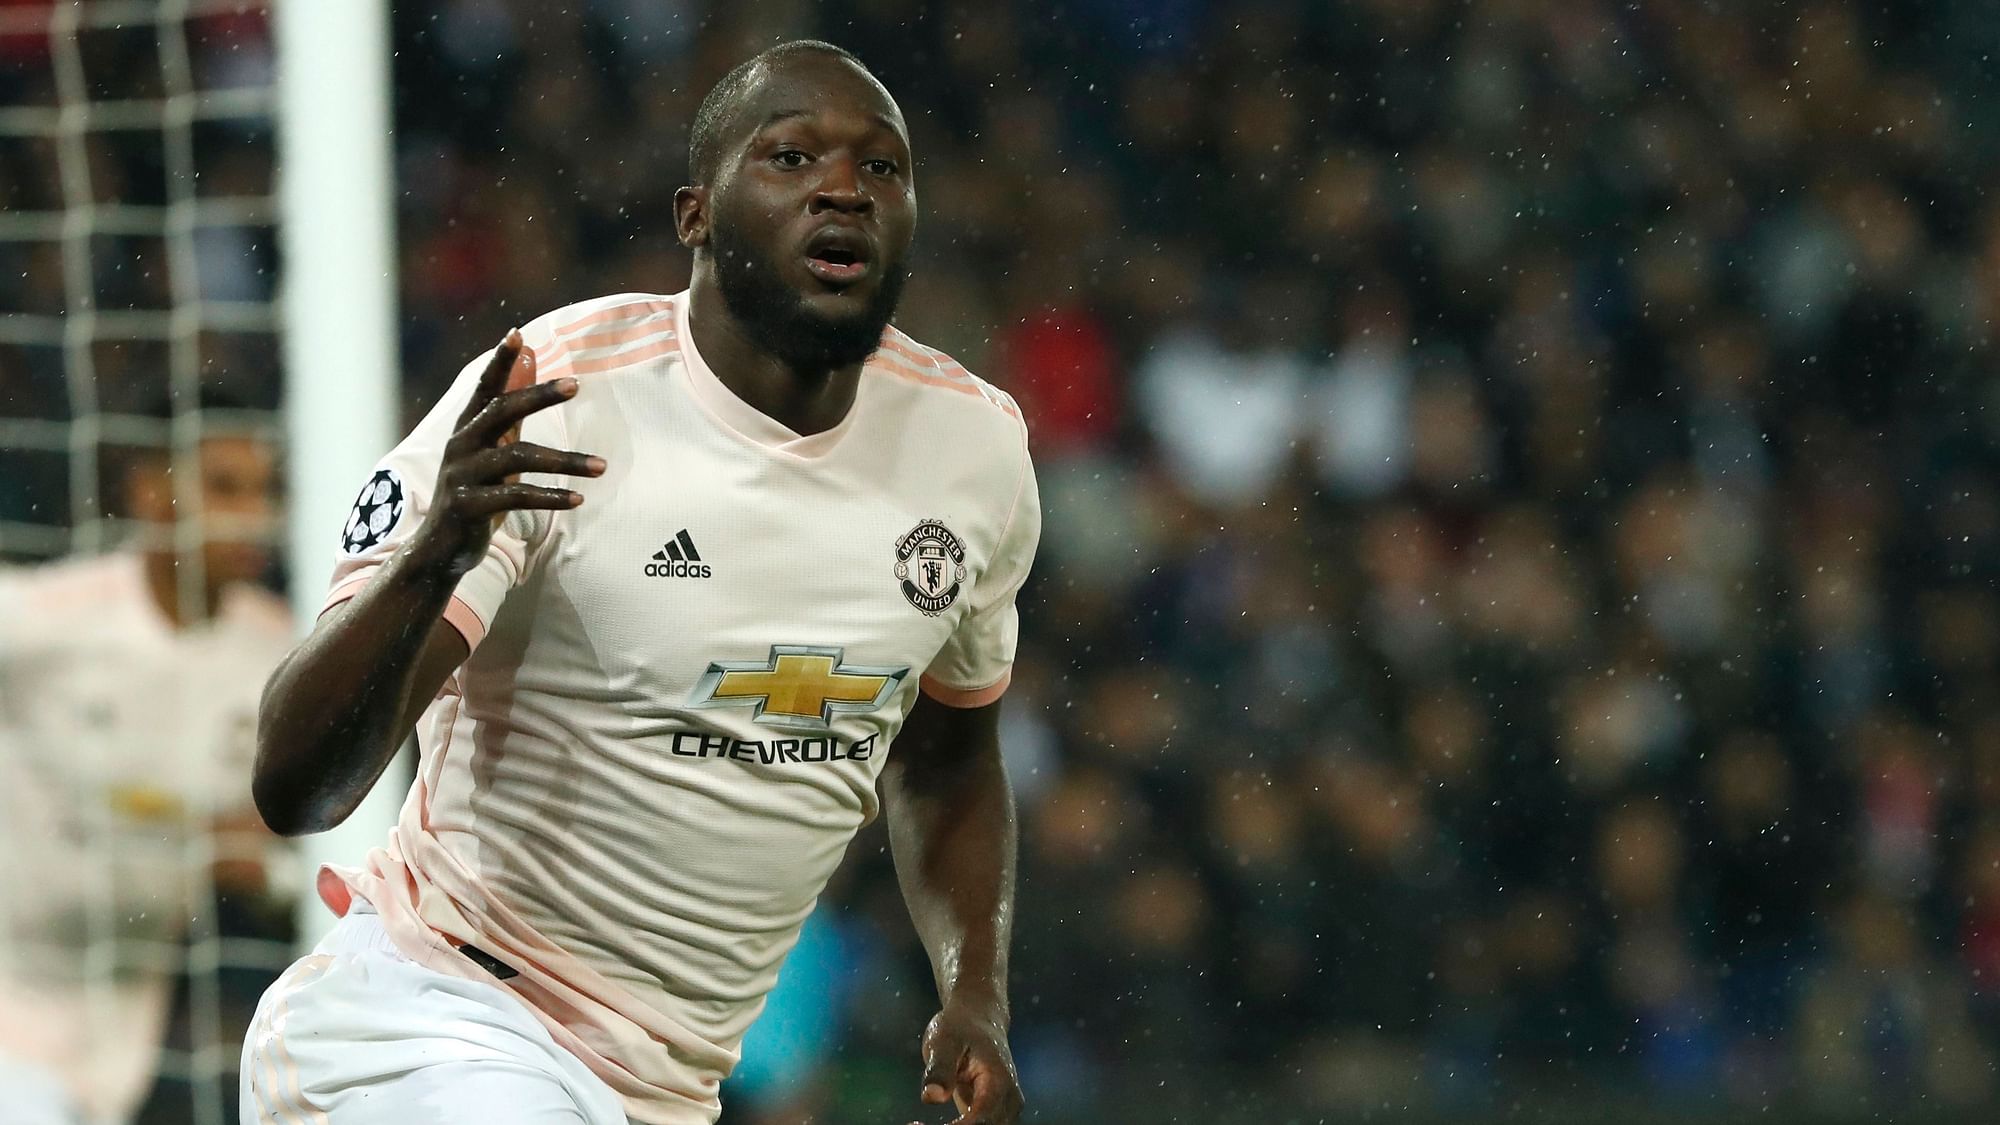 Lukaku missed both of United’s tour matches in Australia because of injury and had to sit out of Saturday’s match against Inter Milan in Singapore.